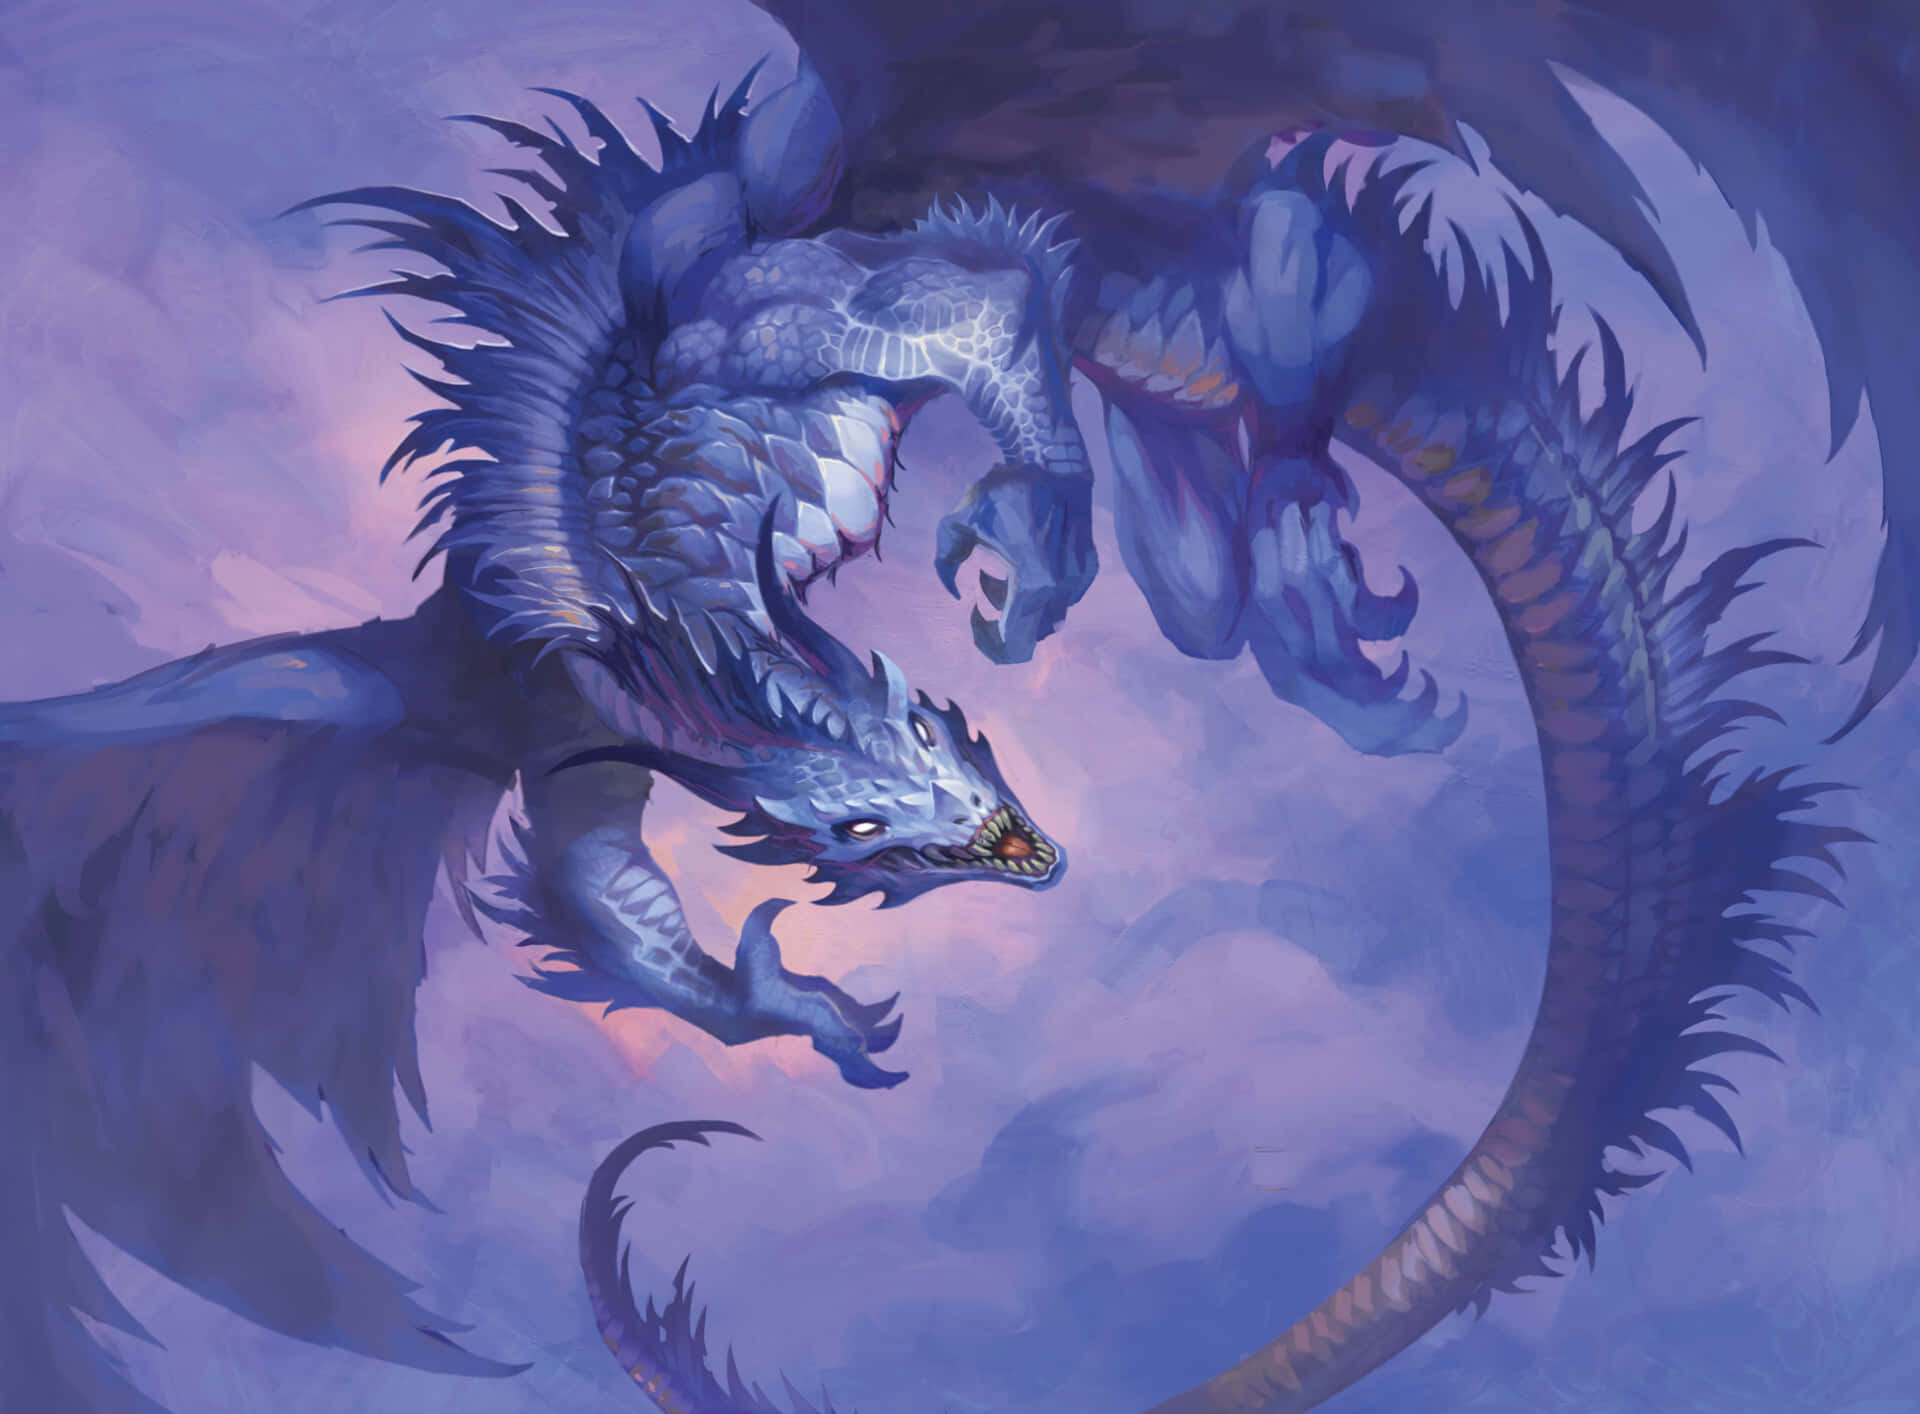 A fierce Mythical Dragon, set to protect its kingdom Wallpaper